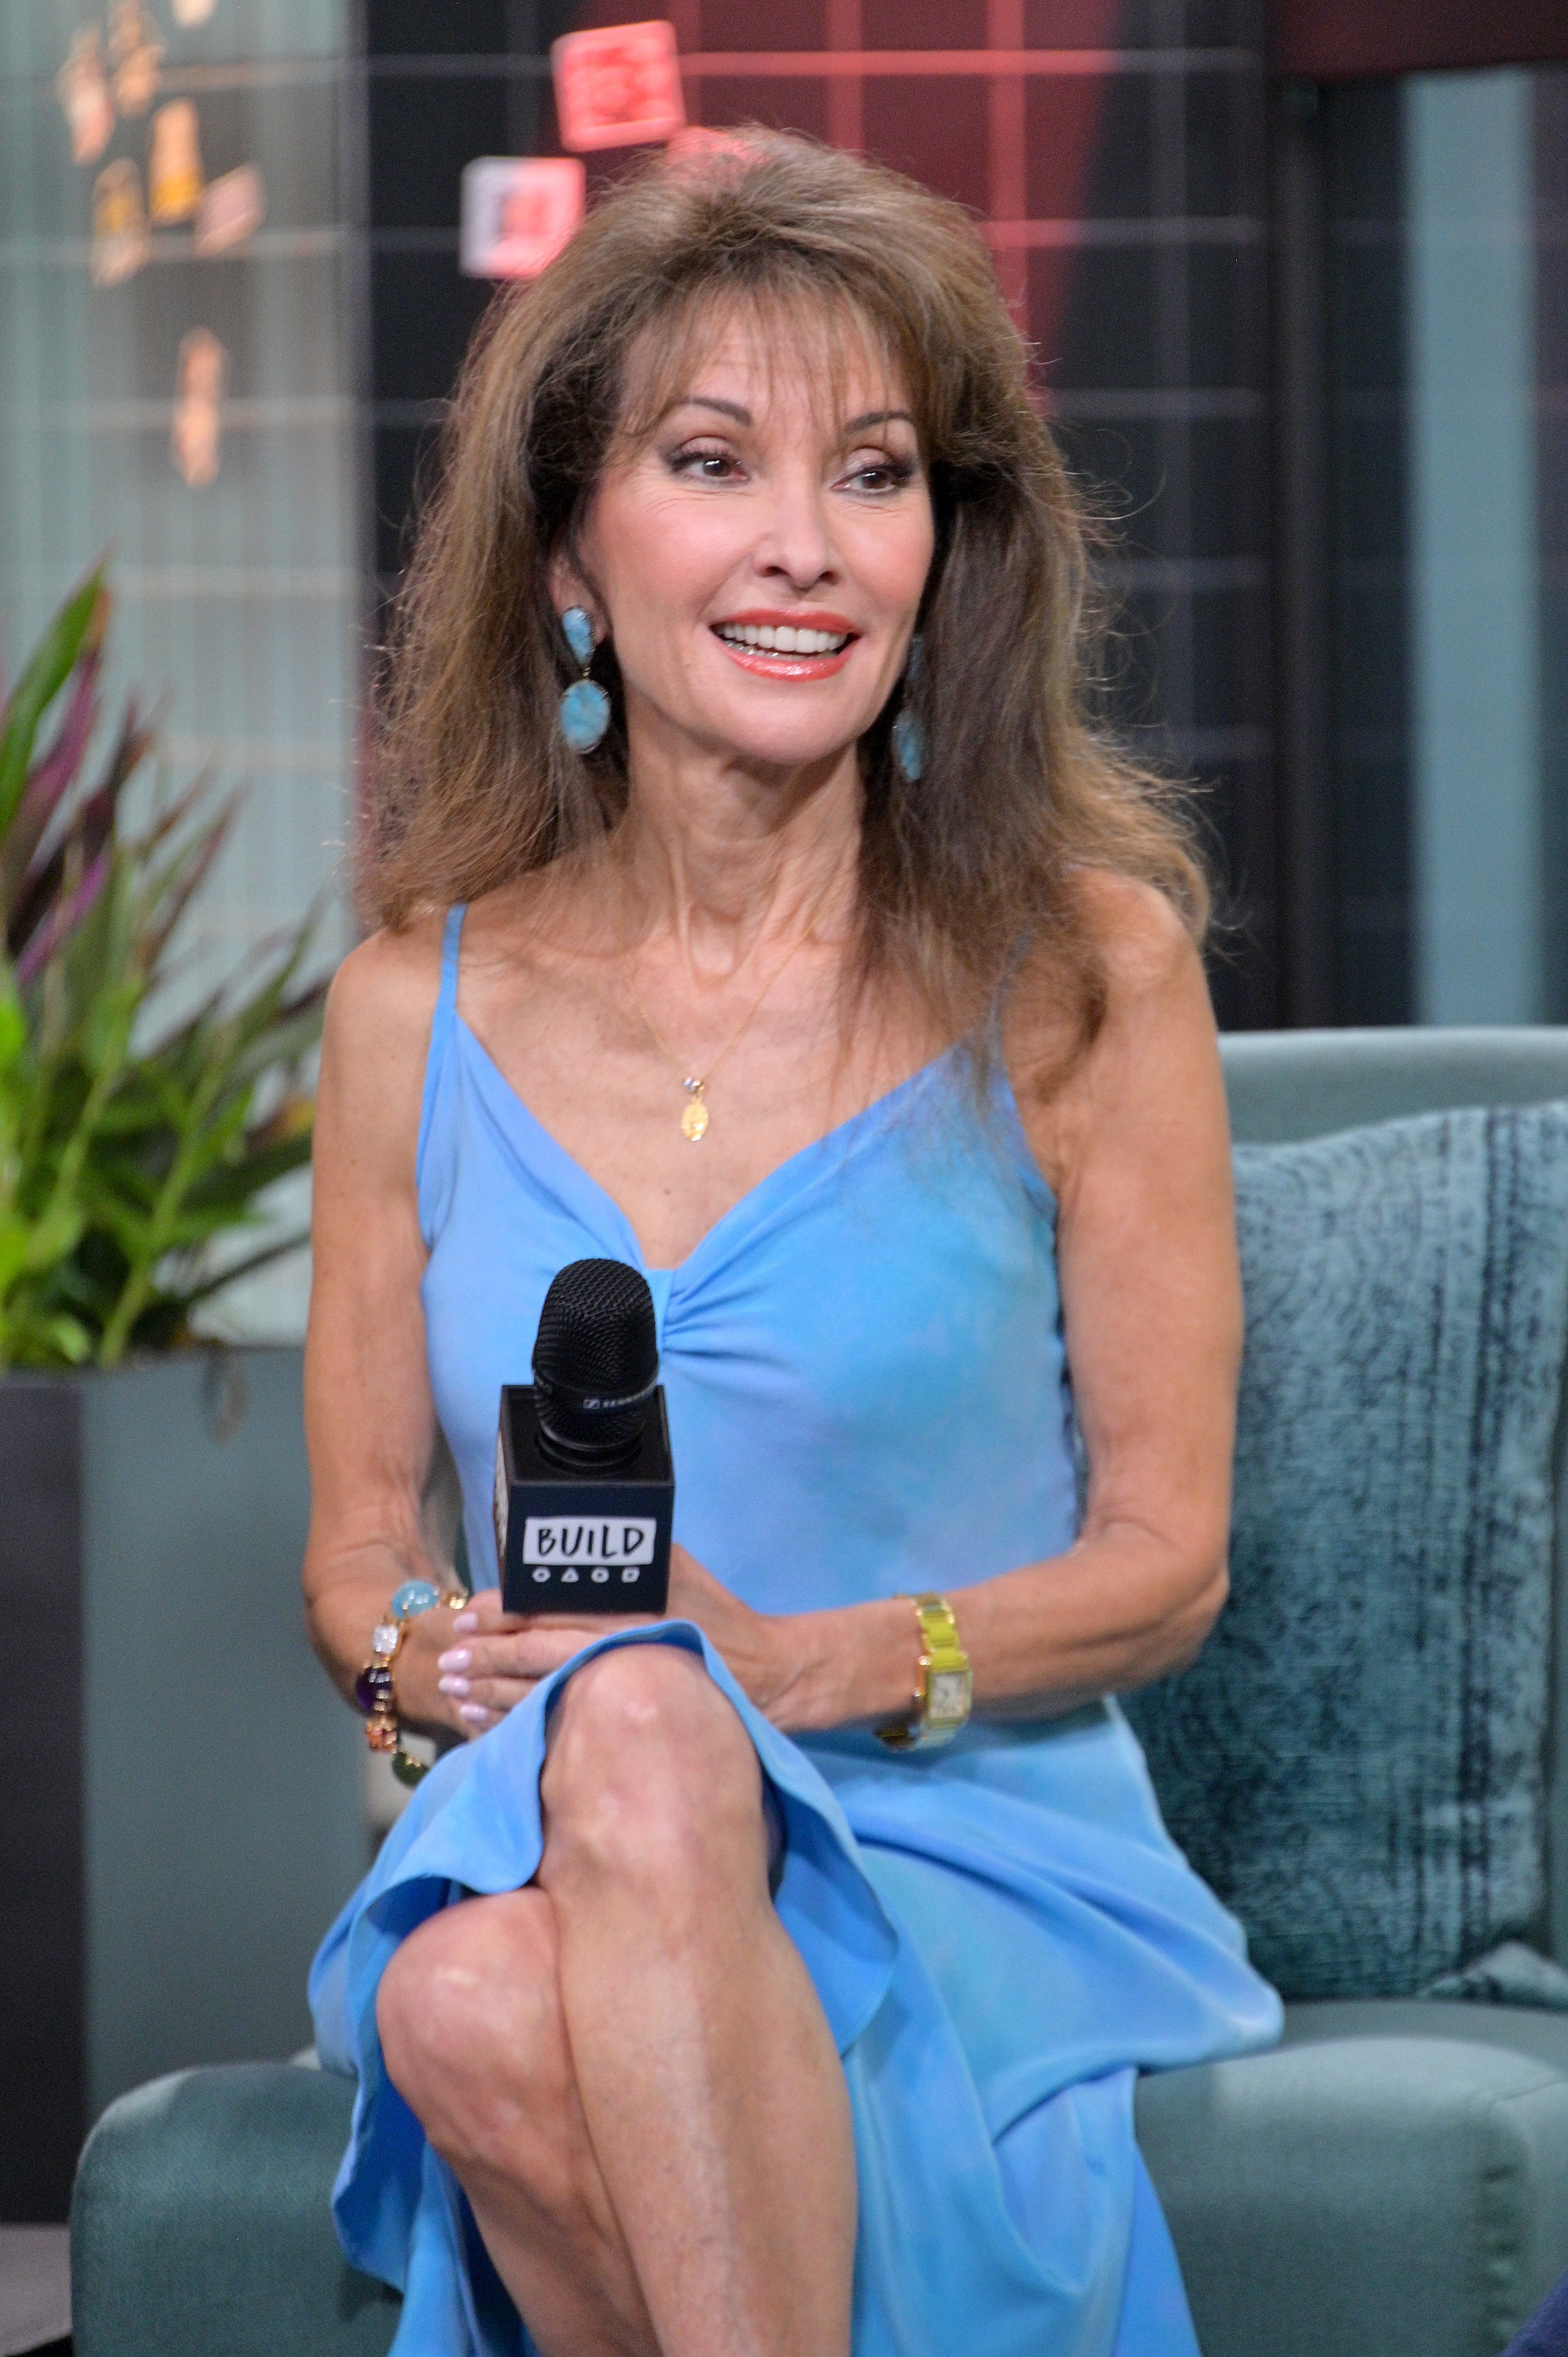  Susan Lucci visits Build to discuss the show "Celebrity Autobiography" at Build Studio on July 09, 2019. | Photo: GettyImages